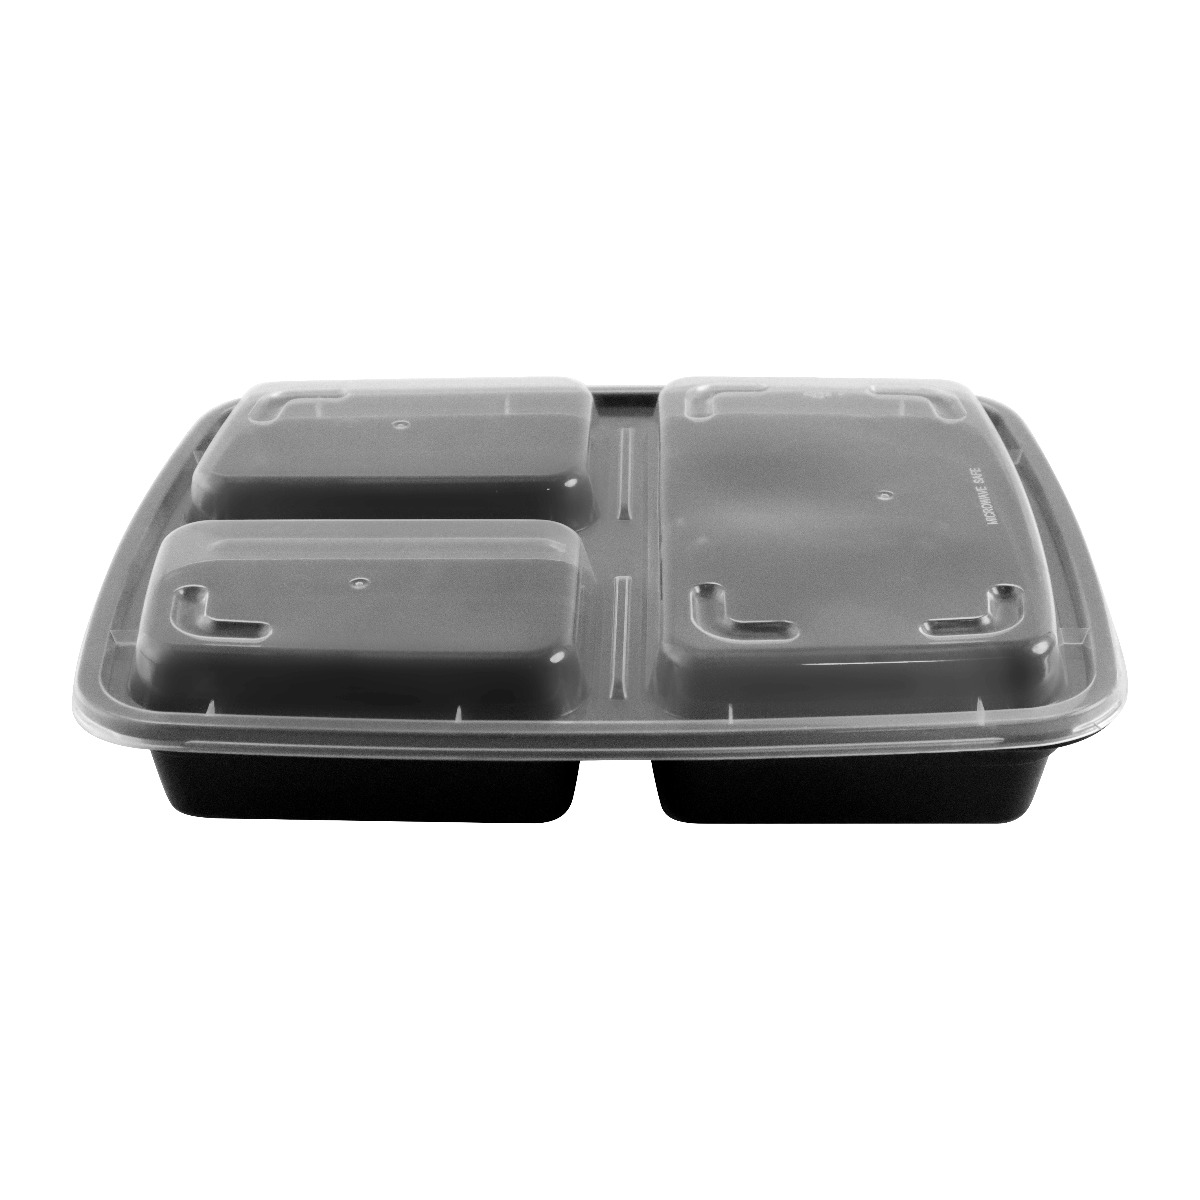 3-Compartment Food Containers